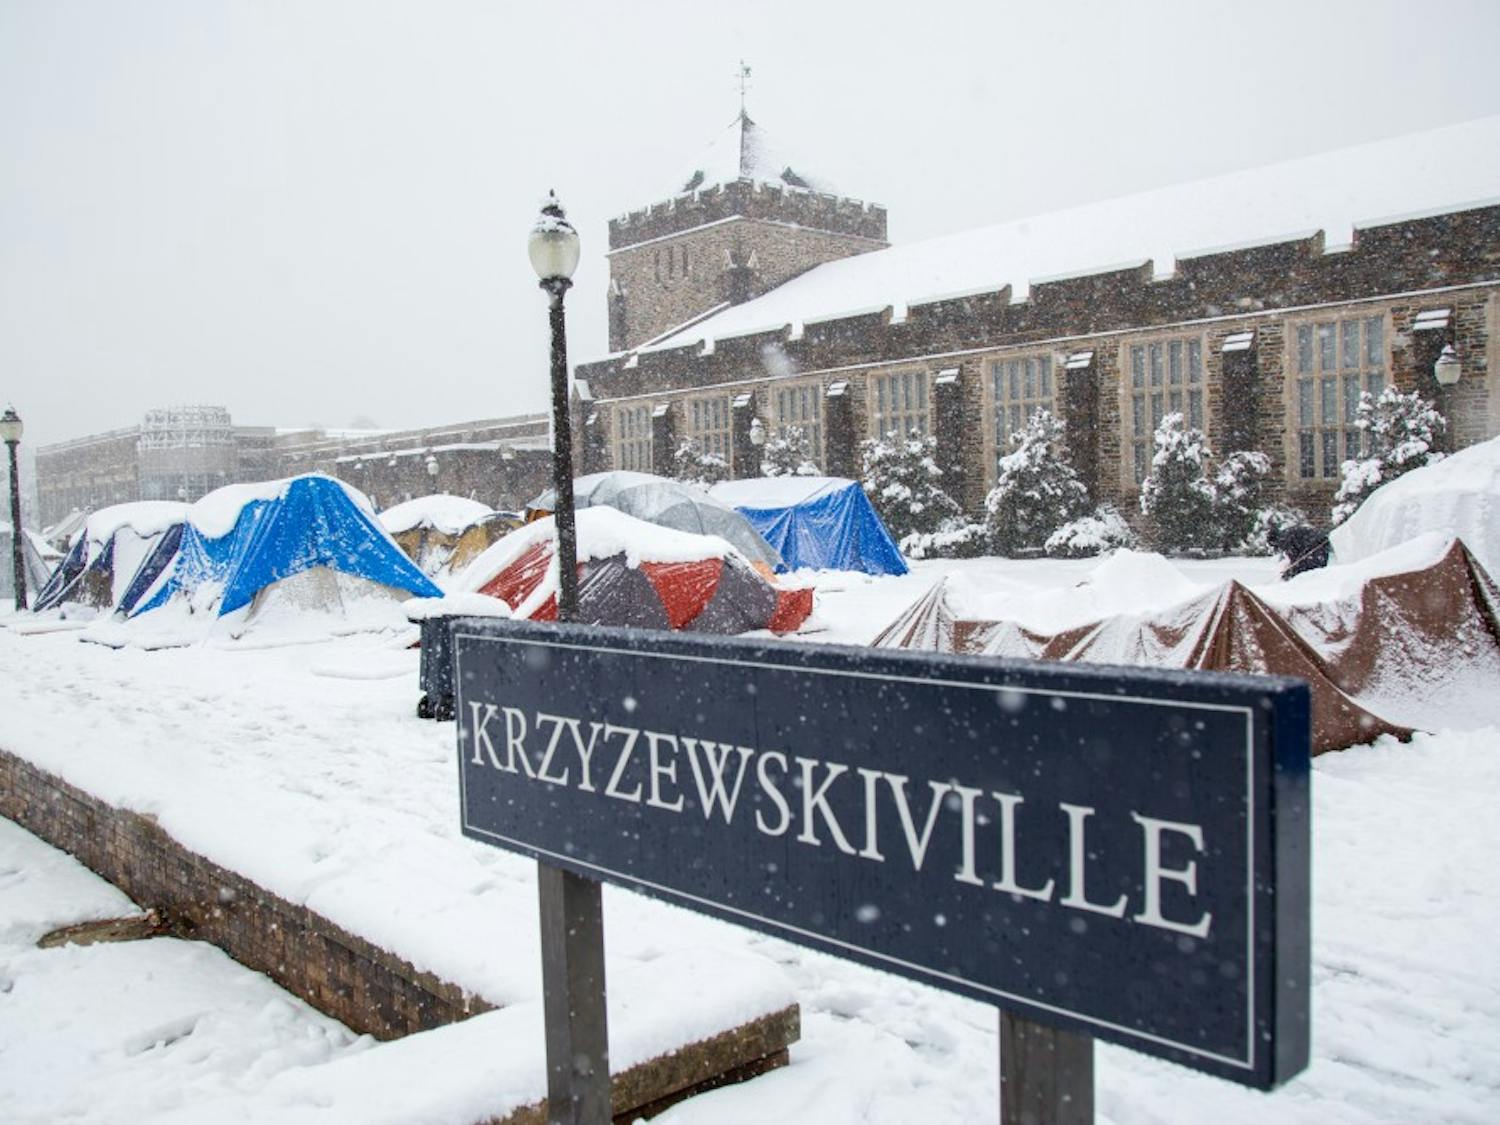 Students build snowmen and salvage their tents weighed down with snow in Krzyzewskivlle.